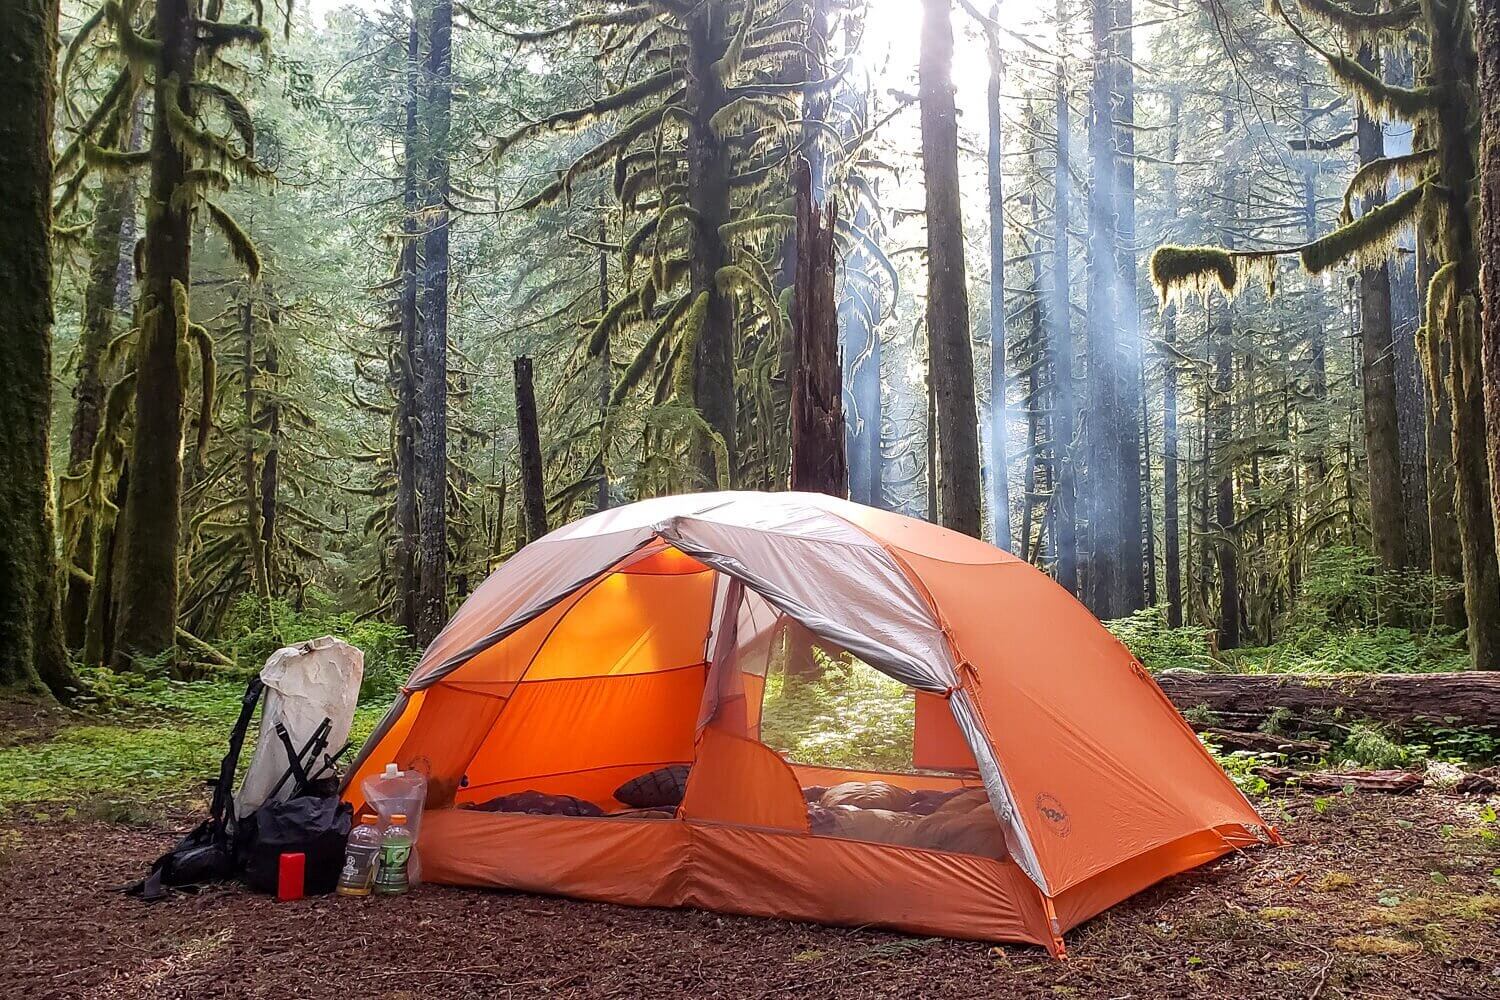 Are camping tents waterproof? Guide to Stay Dry